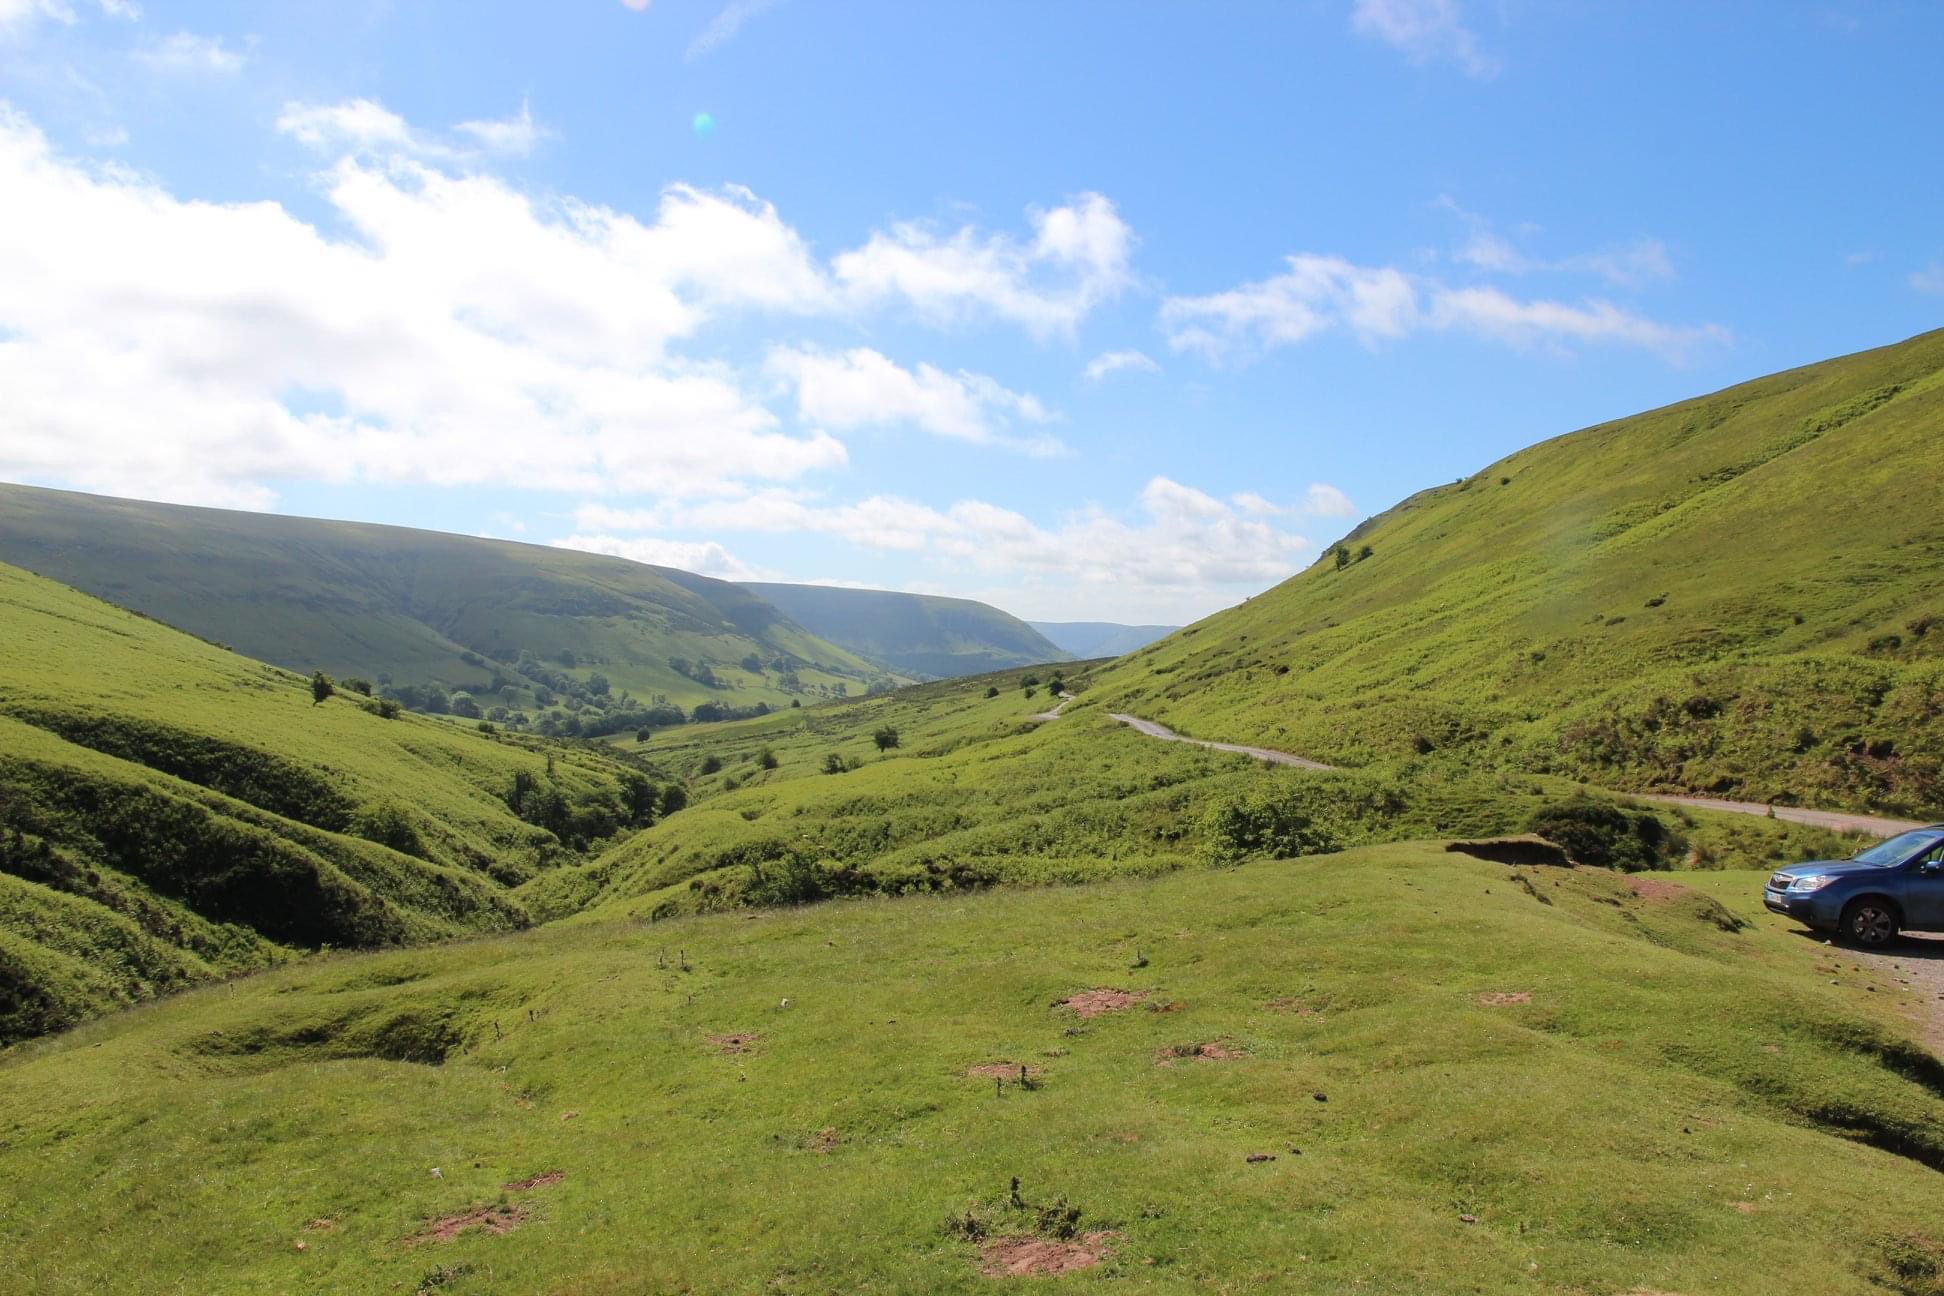 NEWS | Visitors now welcome to visit the Brecon Beacons